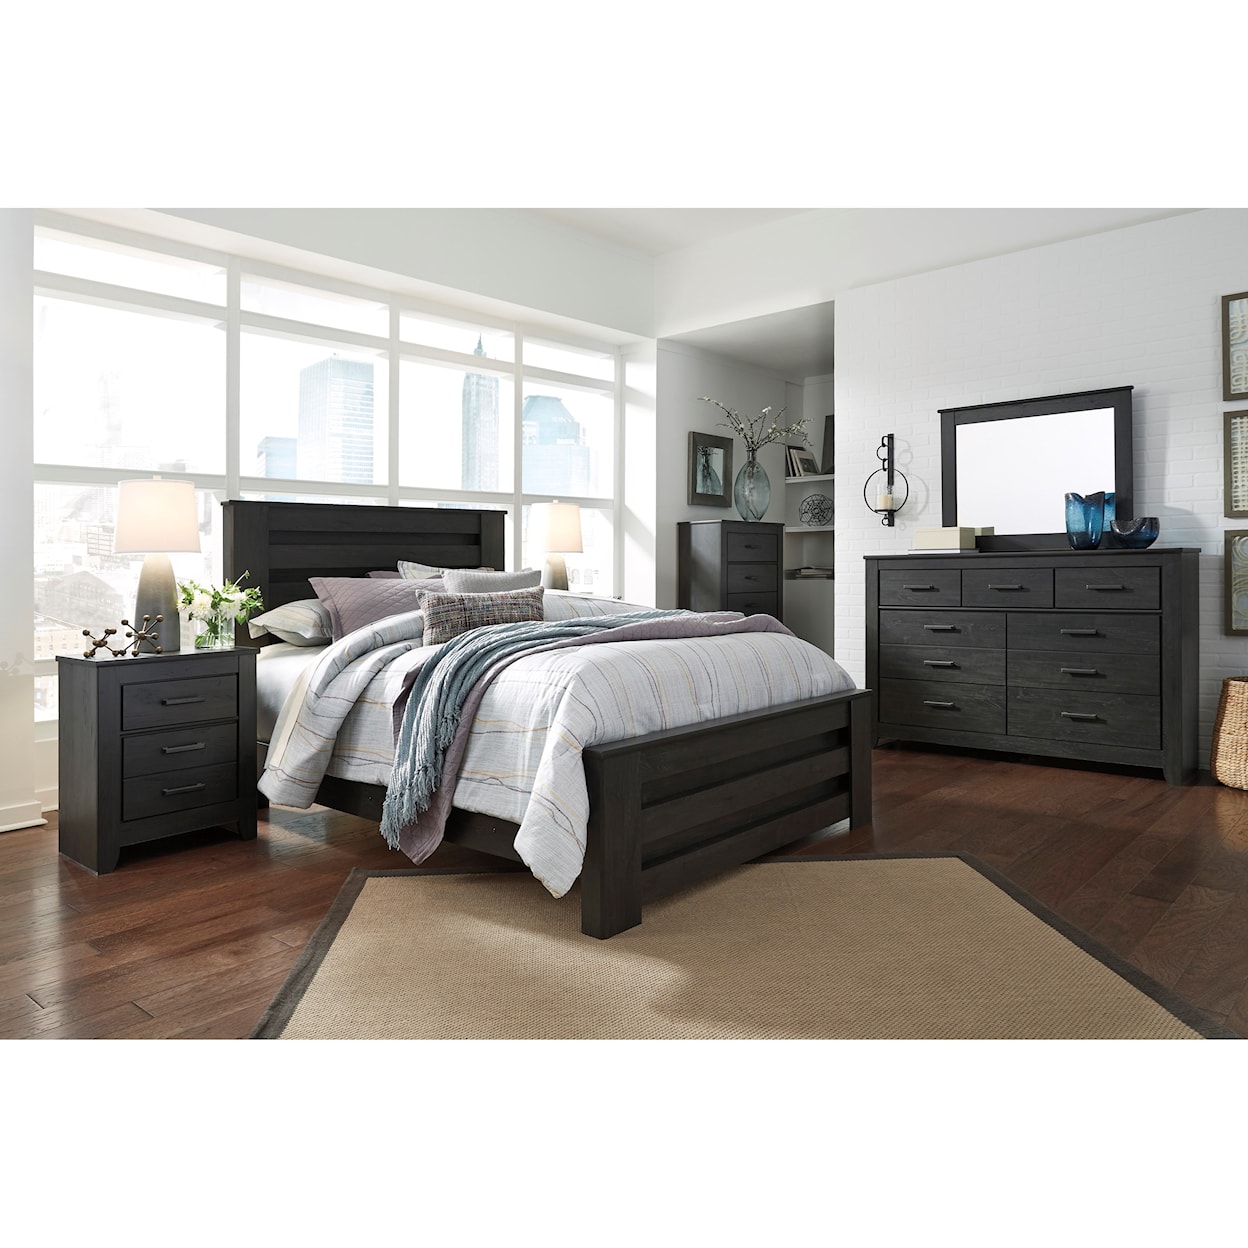 Signature Design by Ashley Furniture Brinxton Queen Bedroom Group